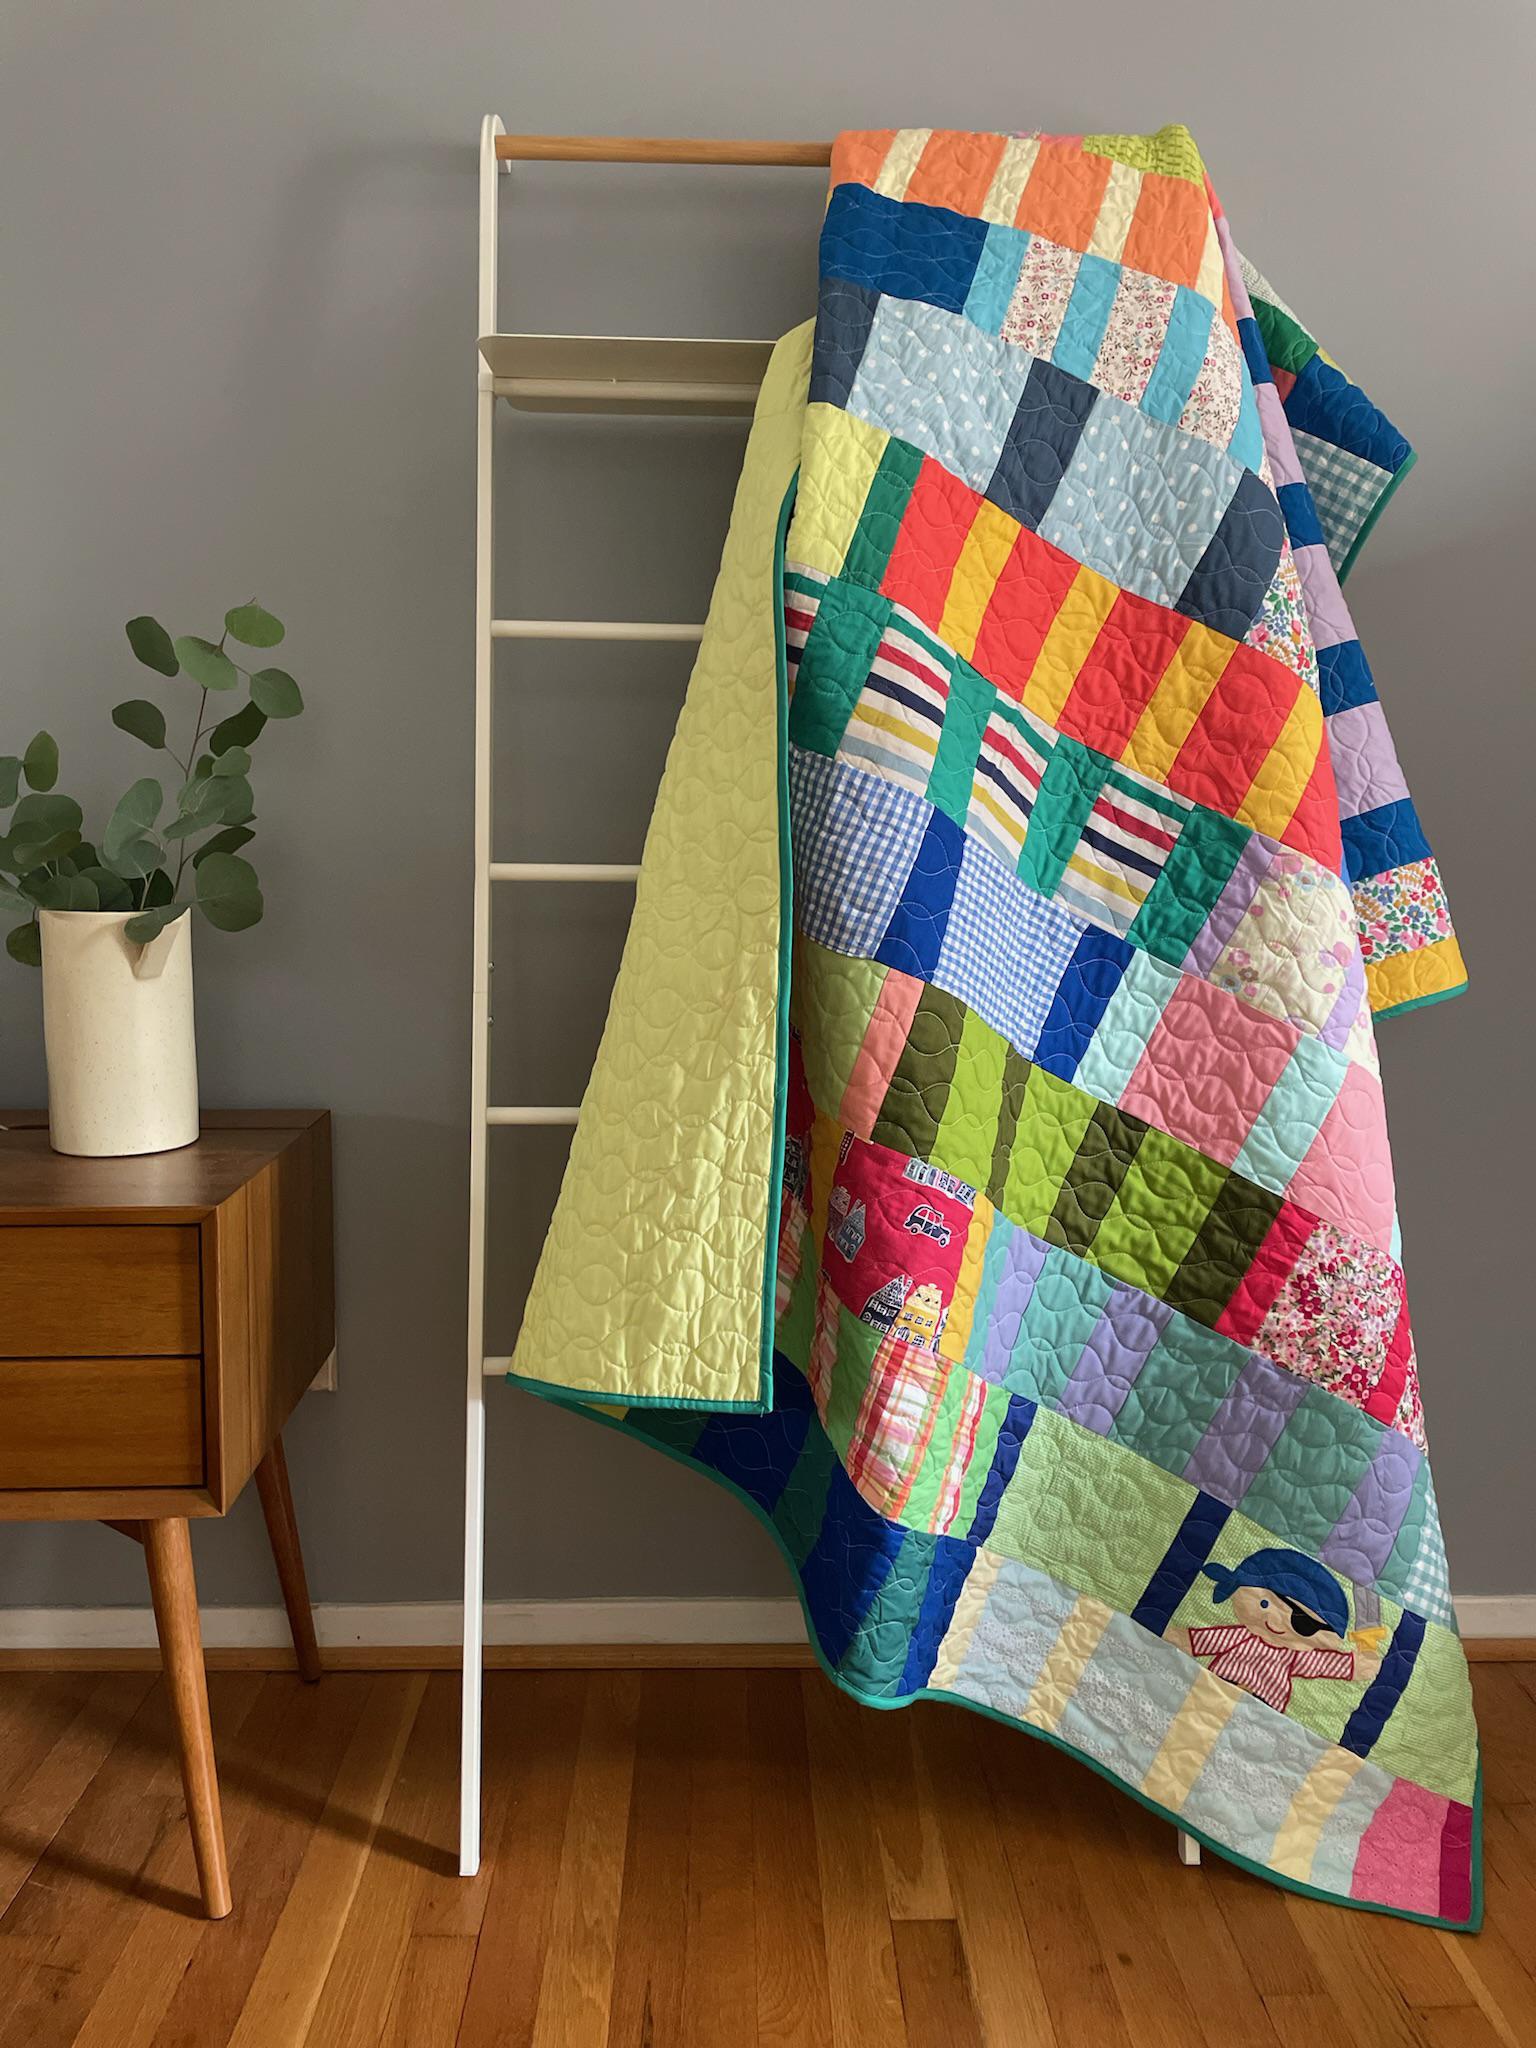 How to make t shirt quilt